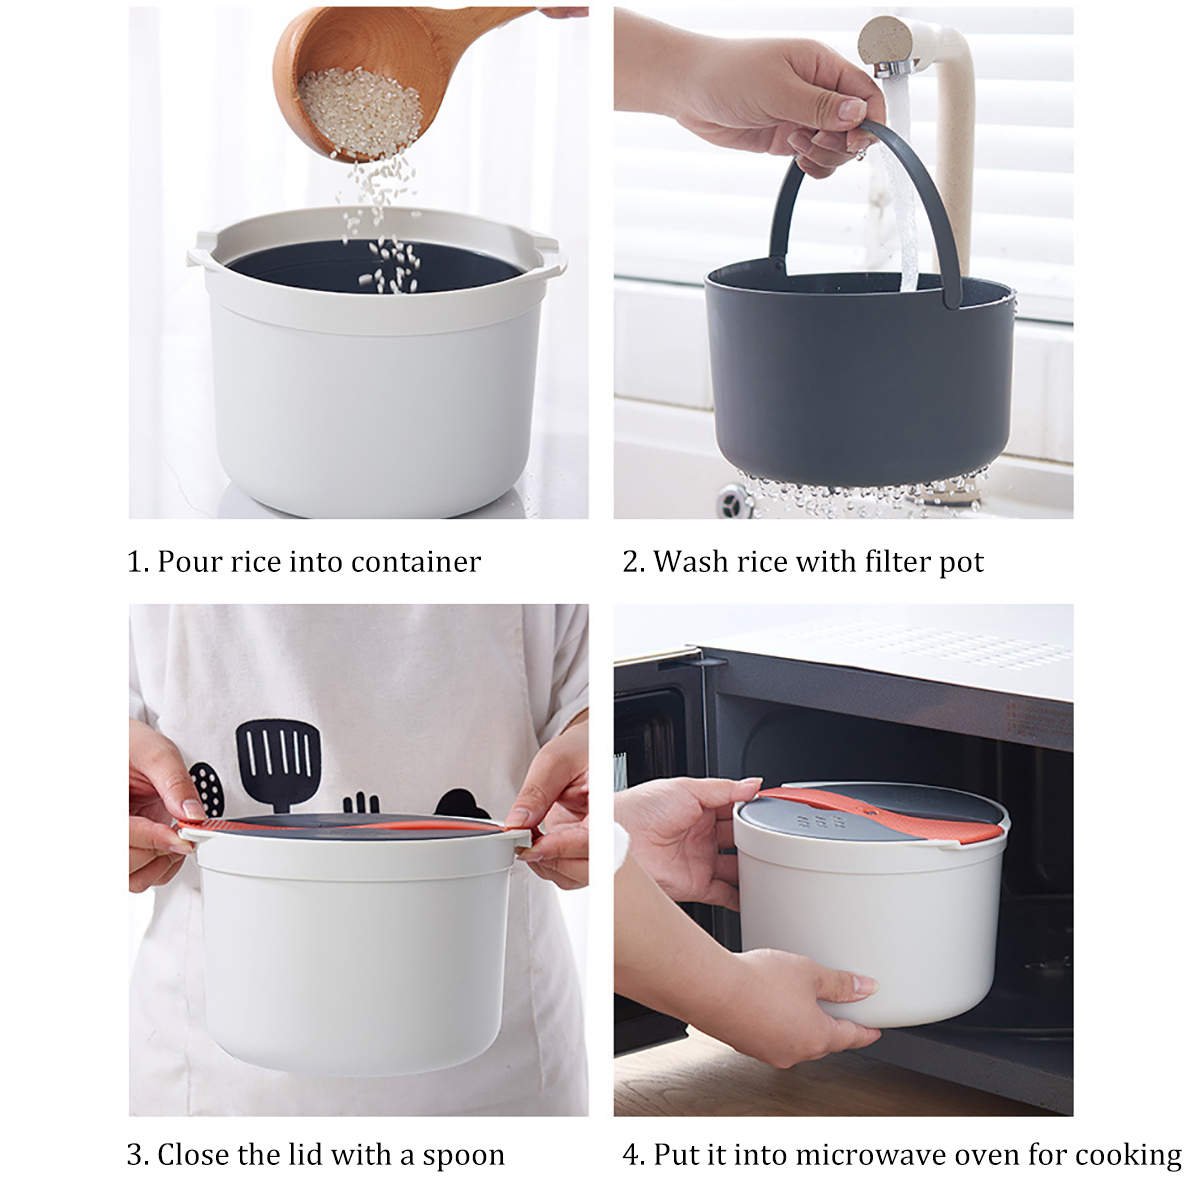 Microwave-Rice-Cooker-Microwave-Rice-Steamer-Bowl-Cooker-Tools-Kitchen-Utensils-1608738-7